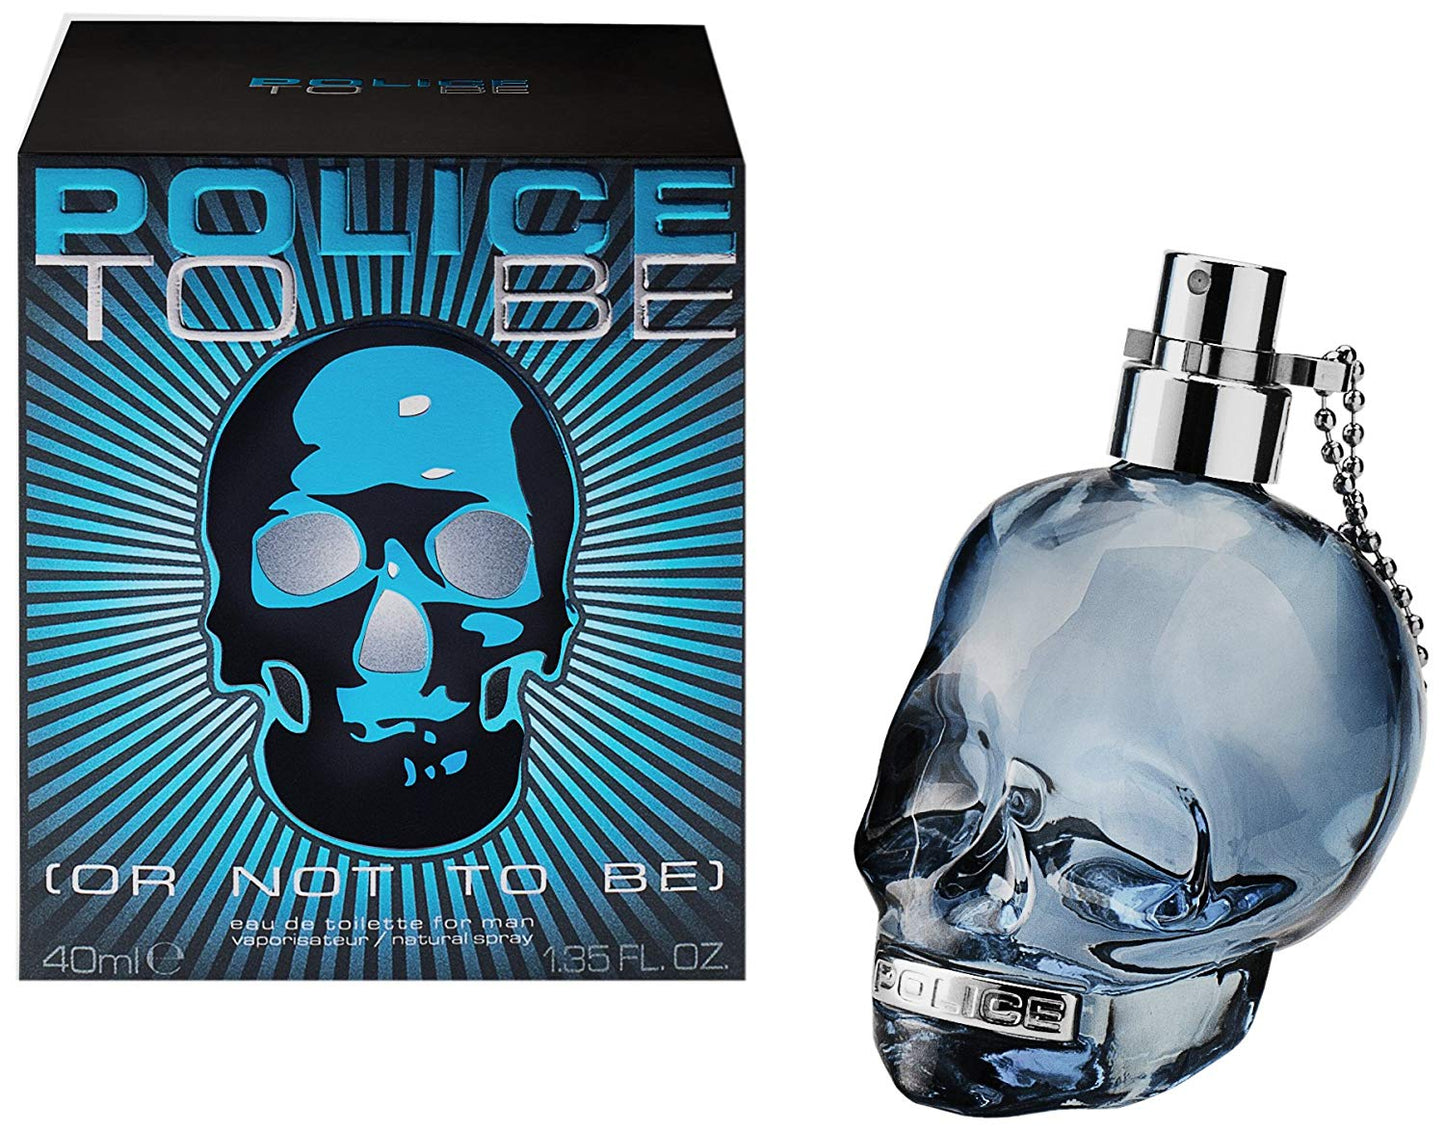 Police To Be (or not to be) Eau de Toilette - RossoLaccaStore